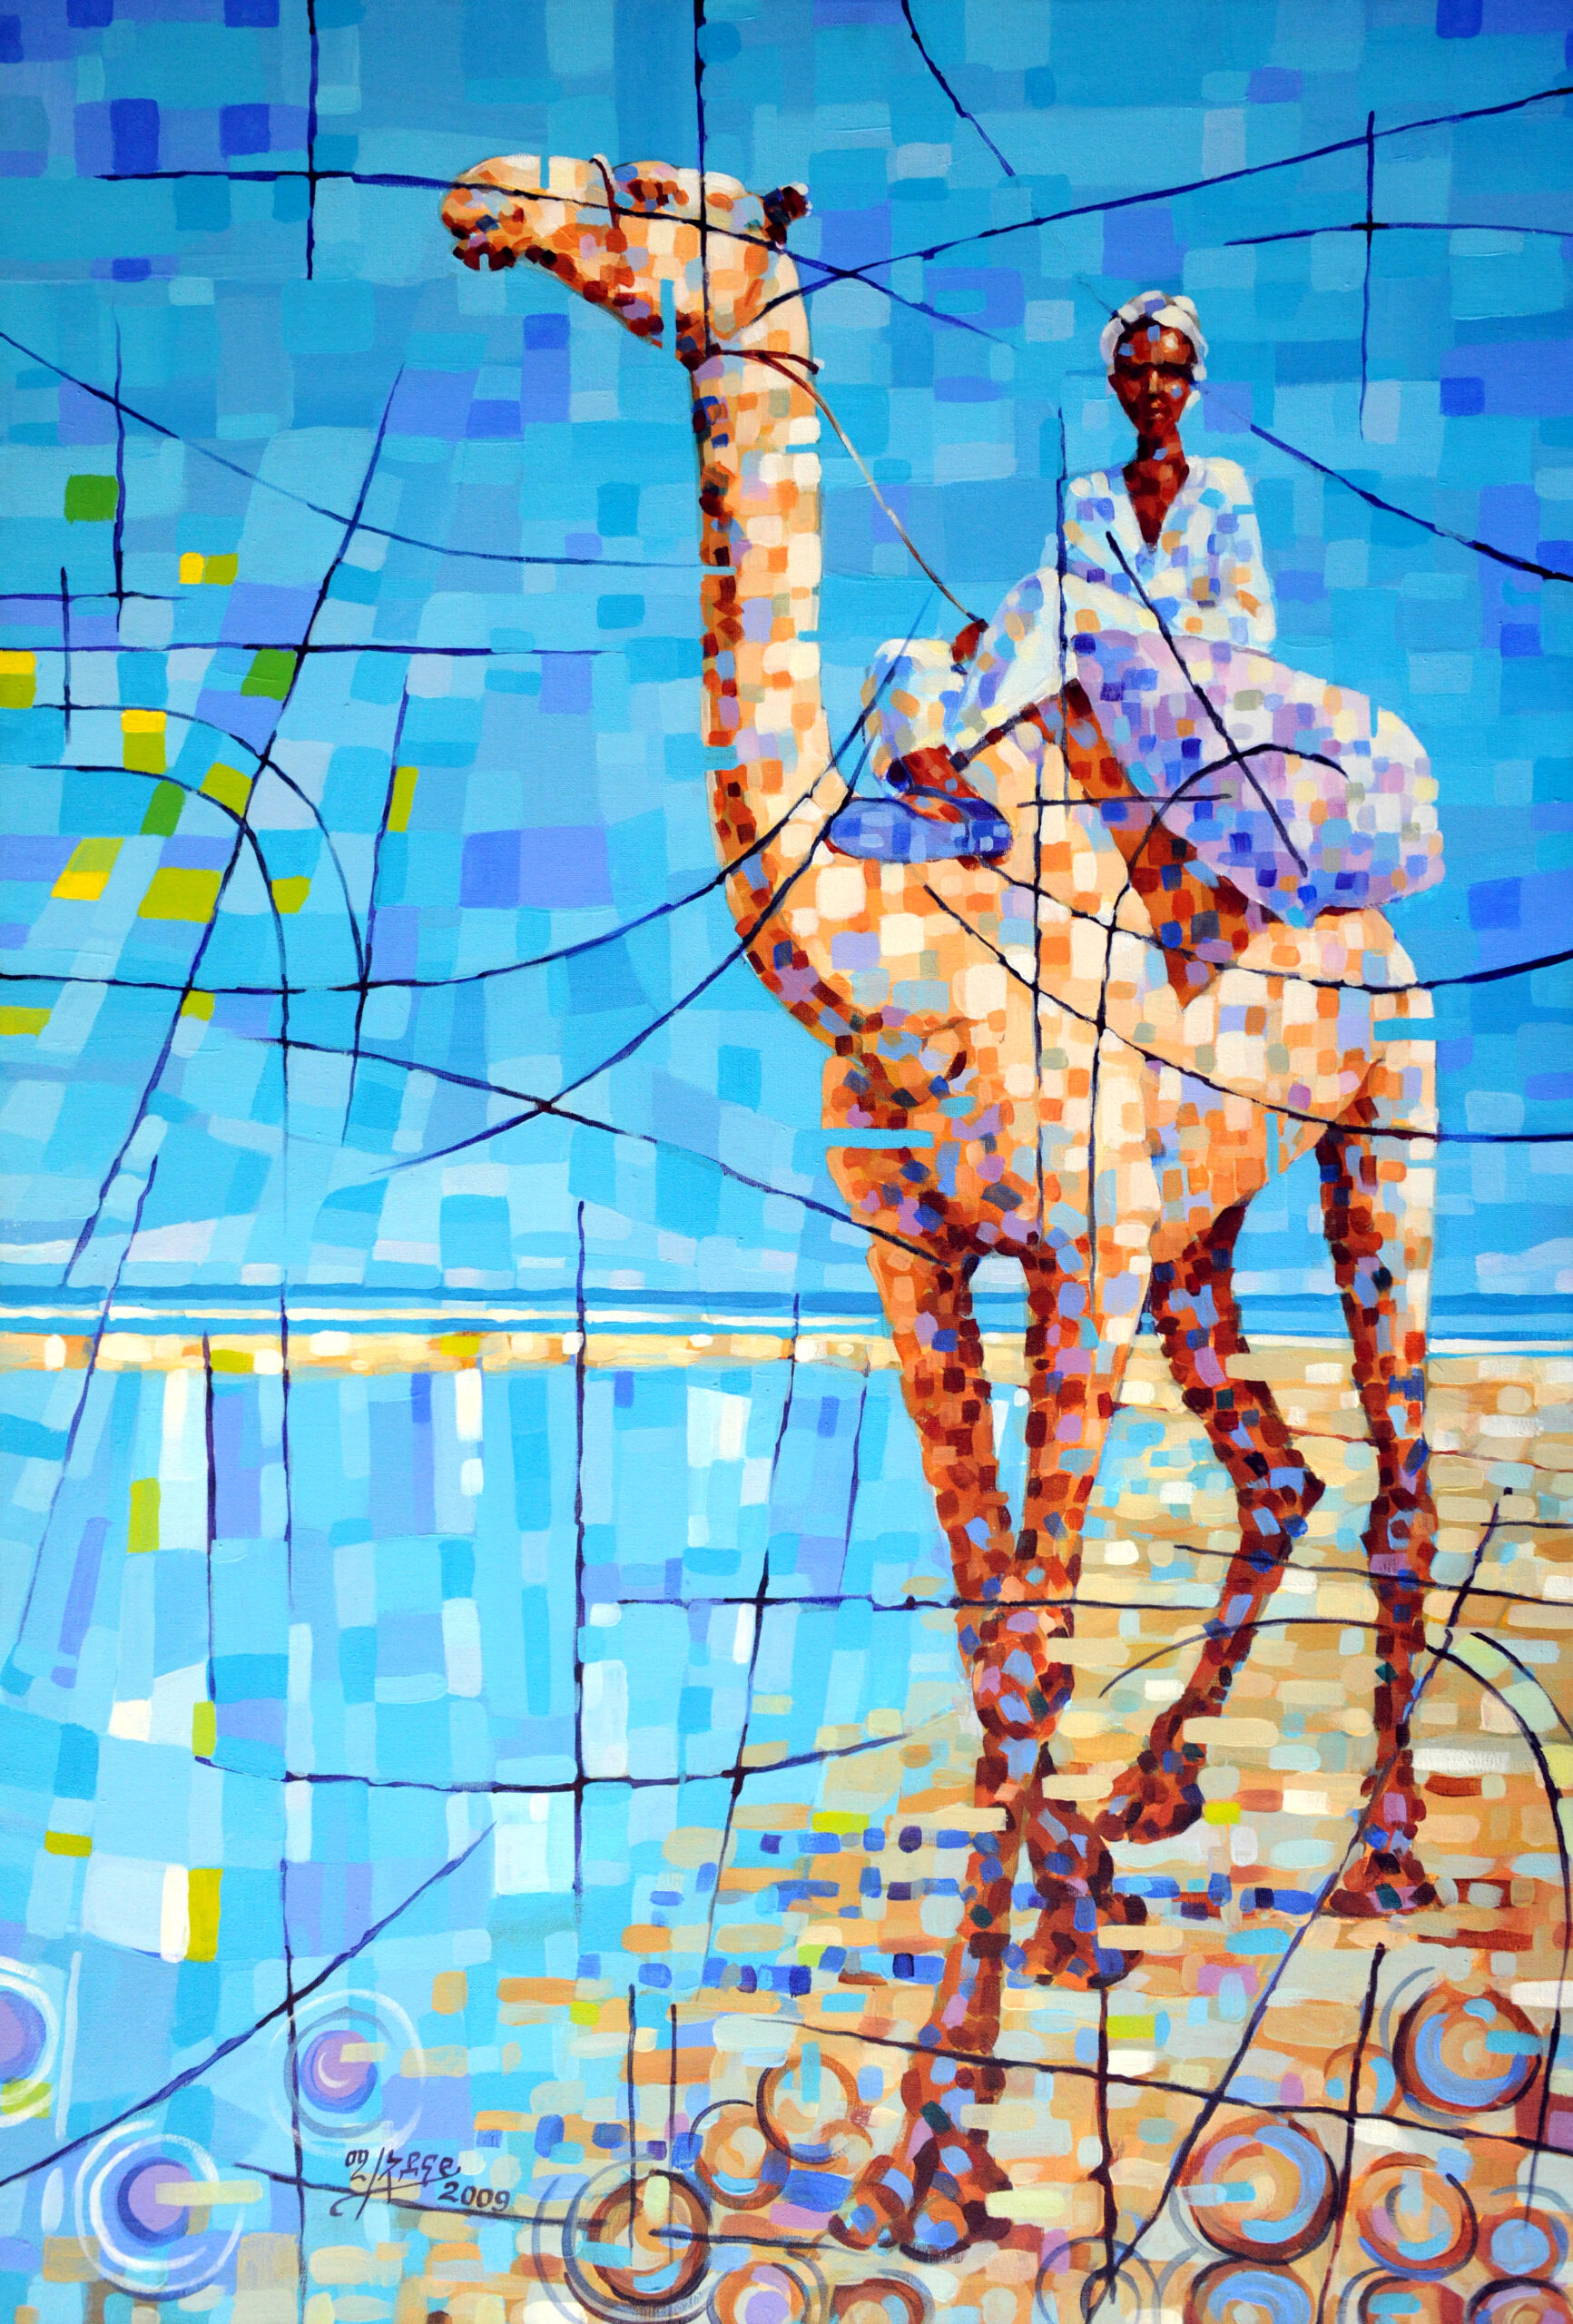 Guardian of the Beach (2009), acrylic on canvas (98 x 69 cm); a person riding a camel